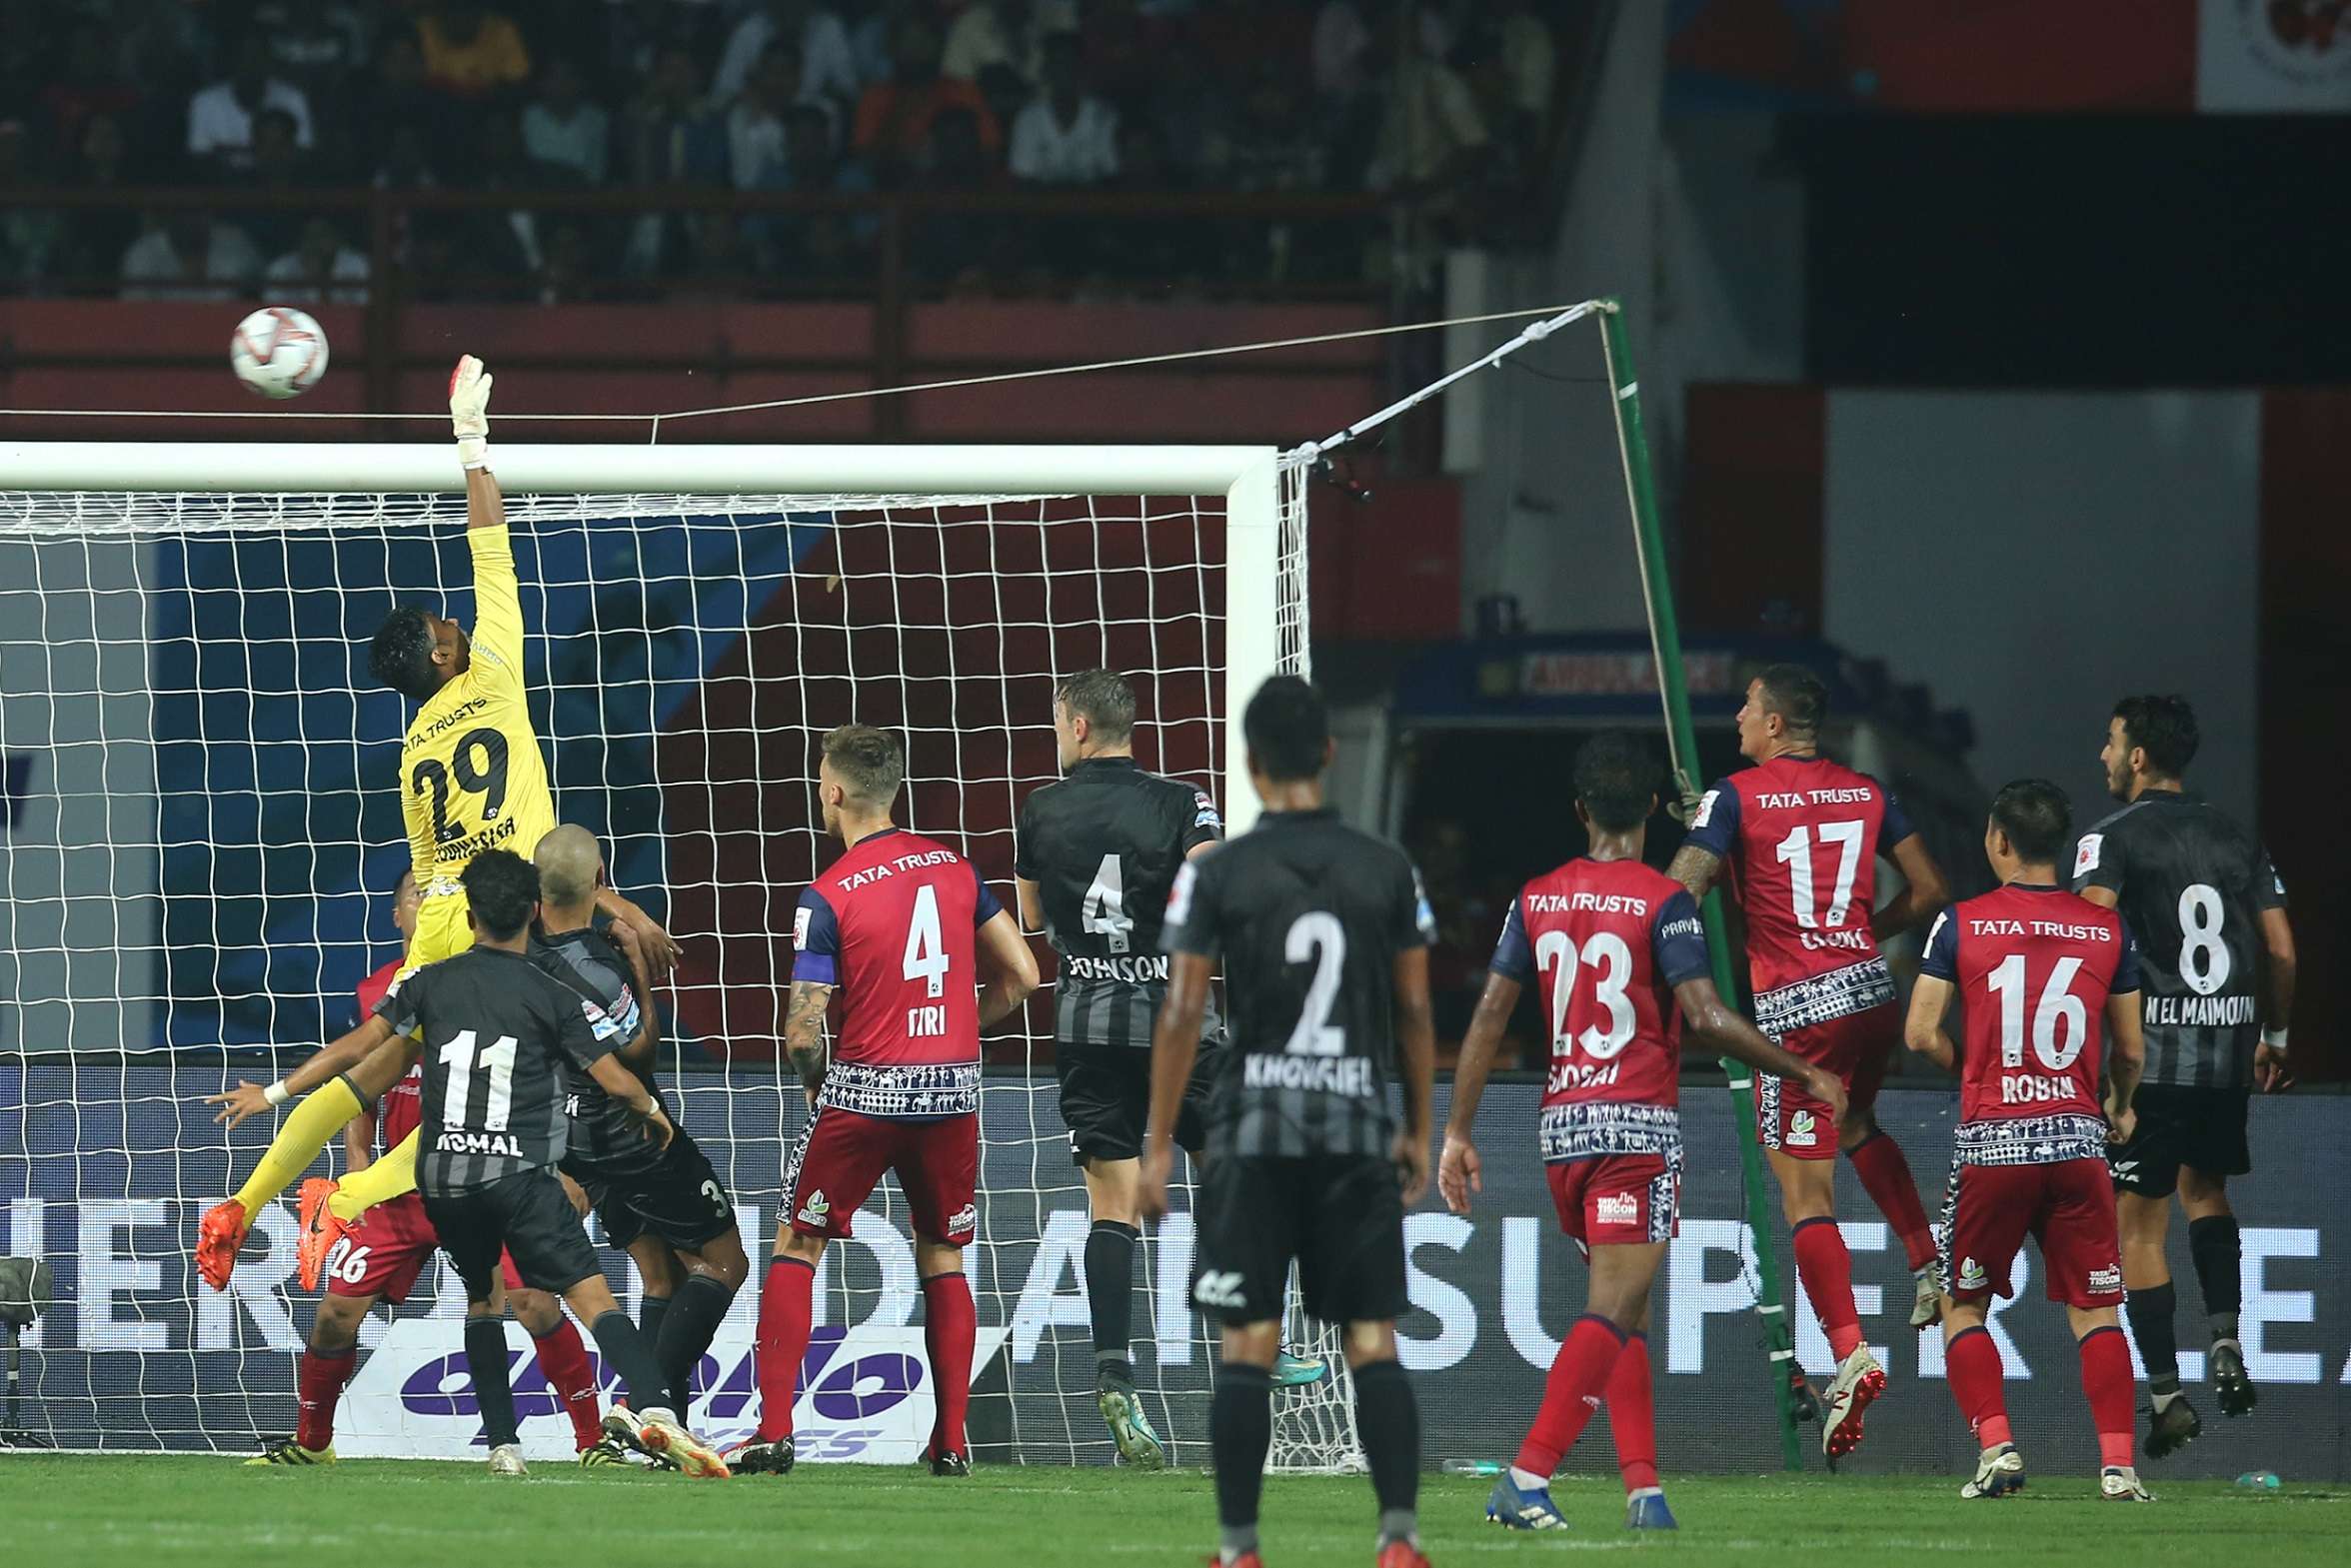 Jamshedpur Goalkeeper Subhasish Roy in action during a match against ATK in Hero ISL